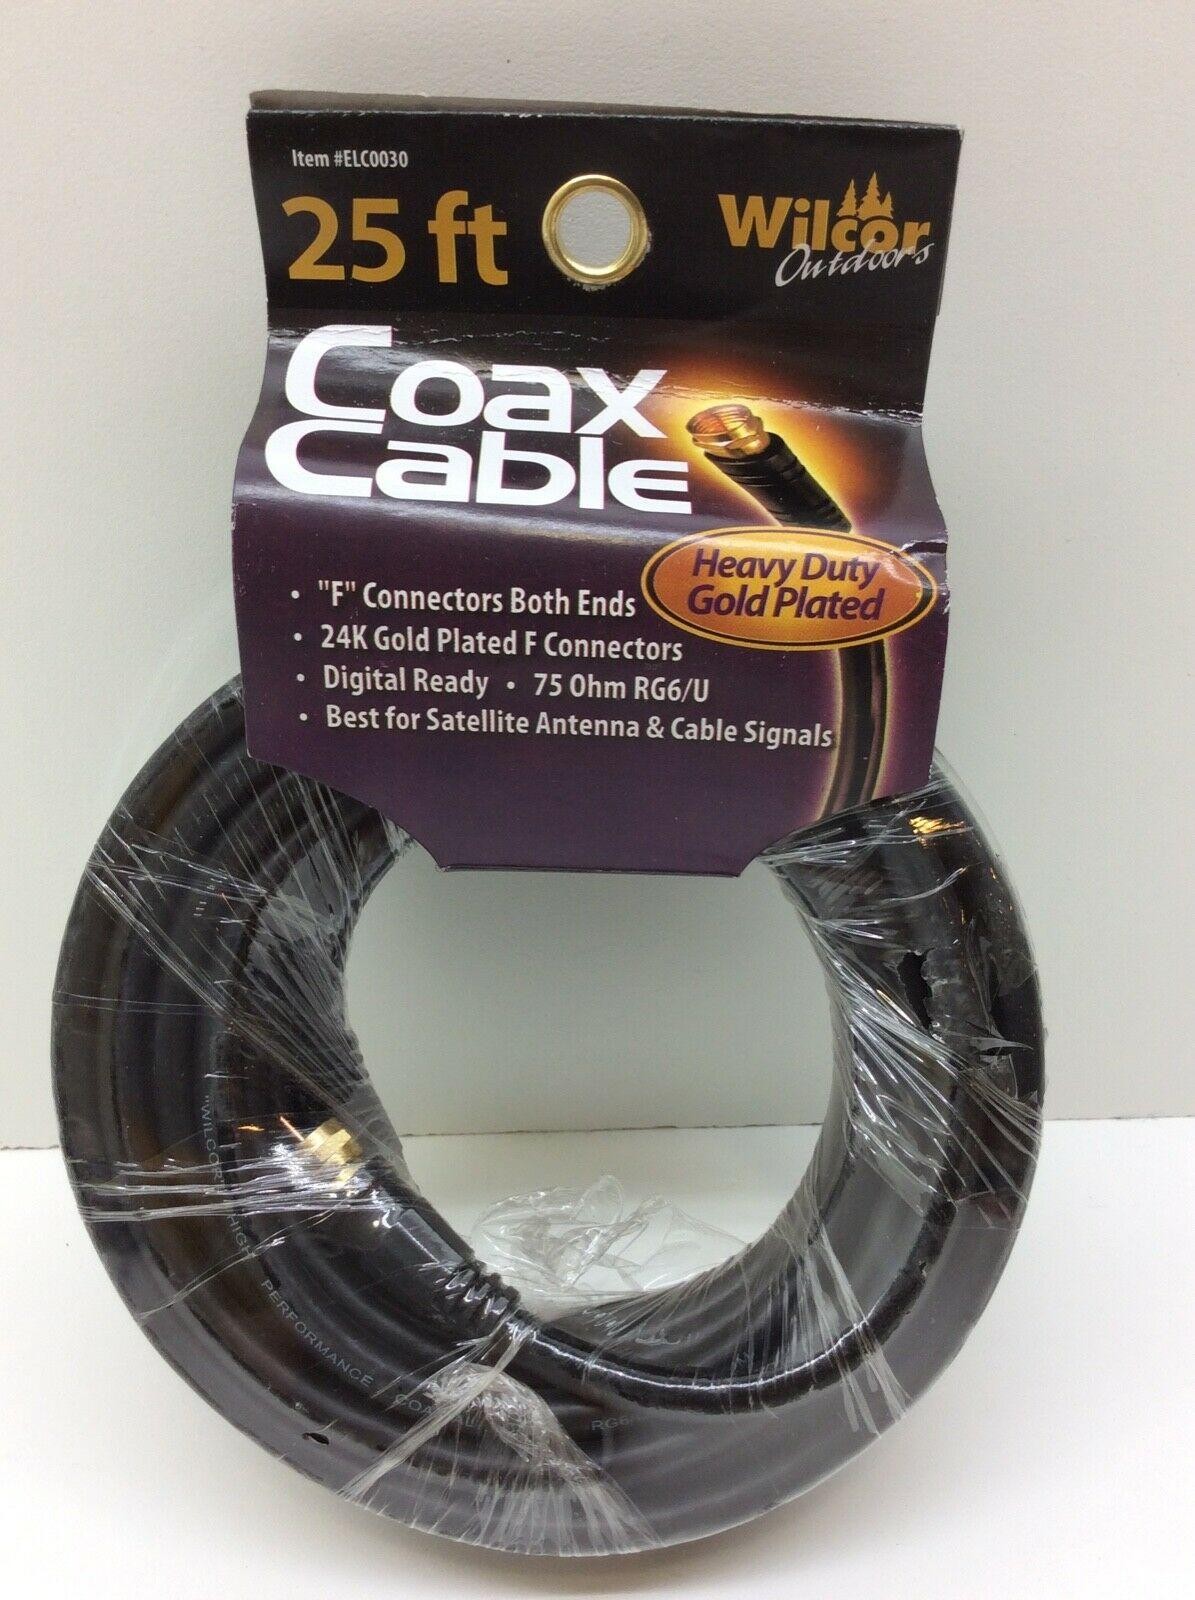 Wilcor 25 Ft Coax Cable ELC0030